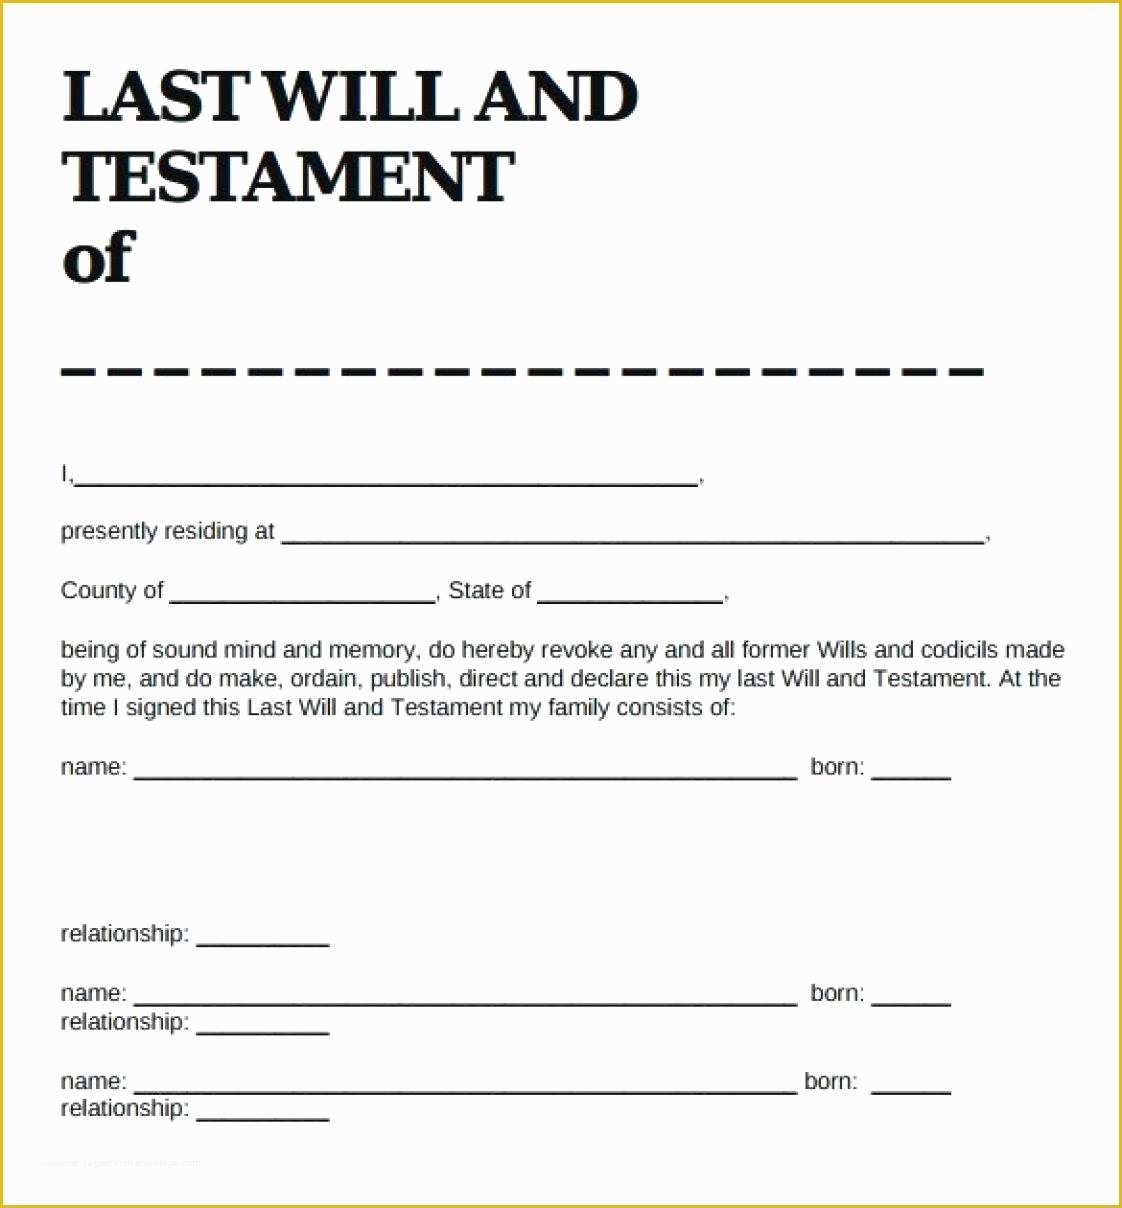 Last Will and Testament Free Template Tennessee Of Last Will and Testament forms Last Will and Testament form